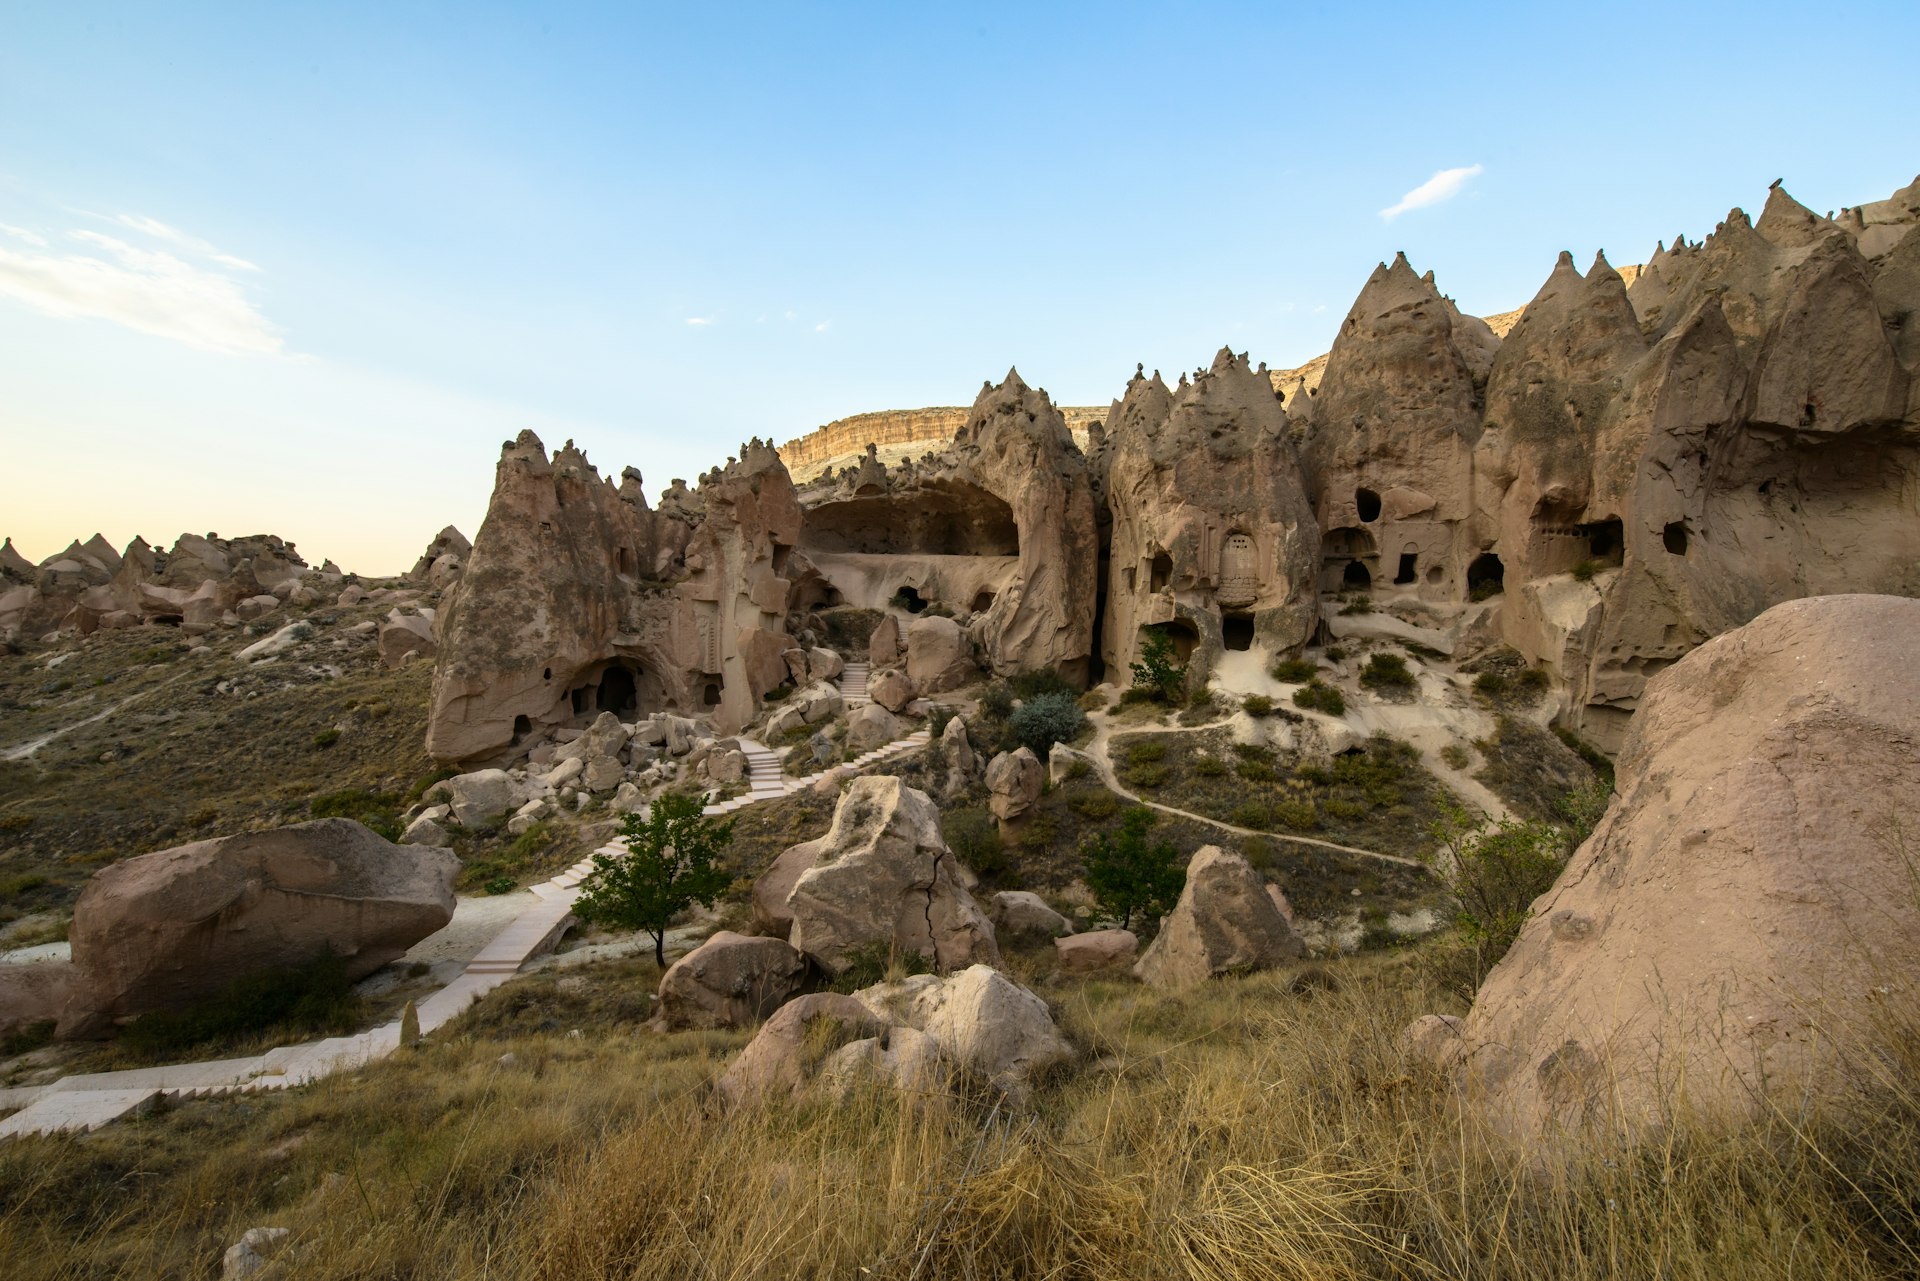 View of the Caves of Zelve Open Air Museum, Capadocia, Turkey from afar